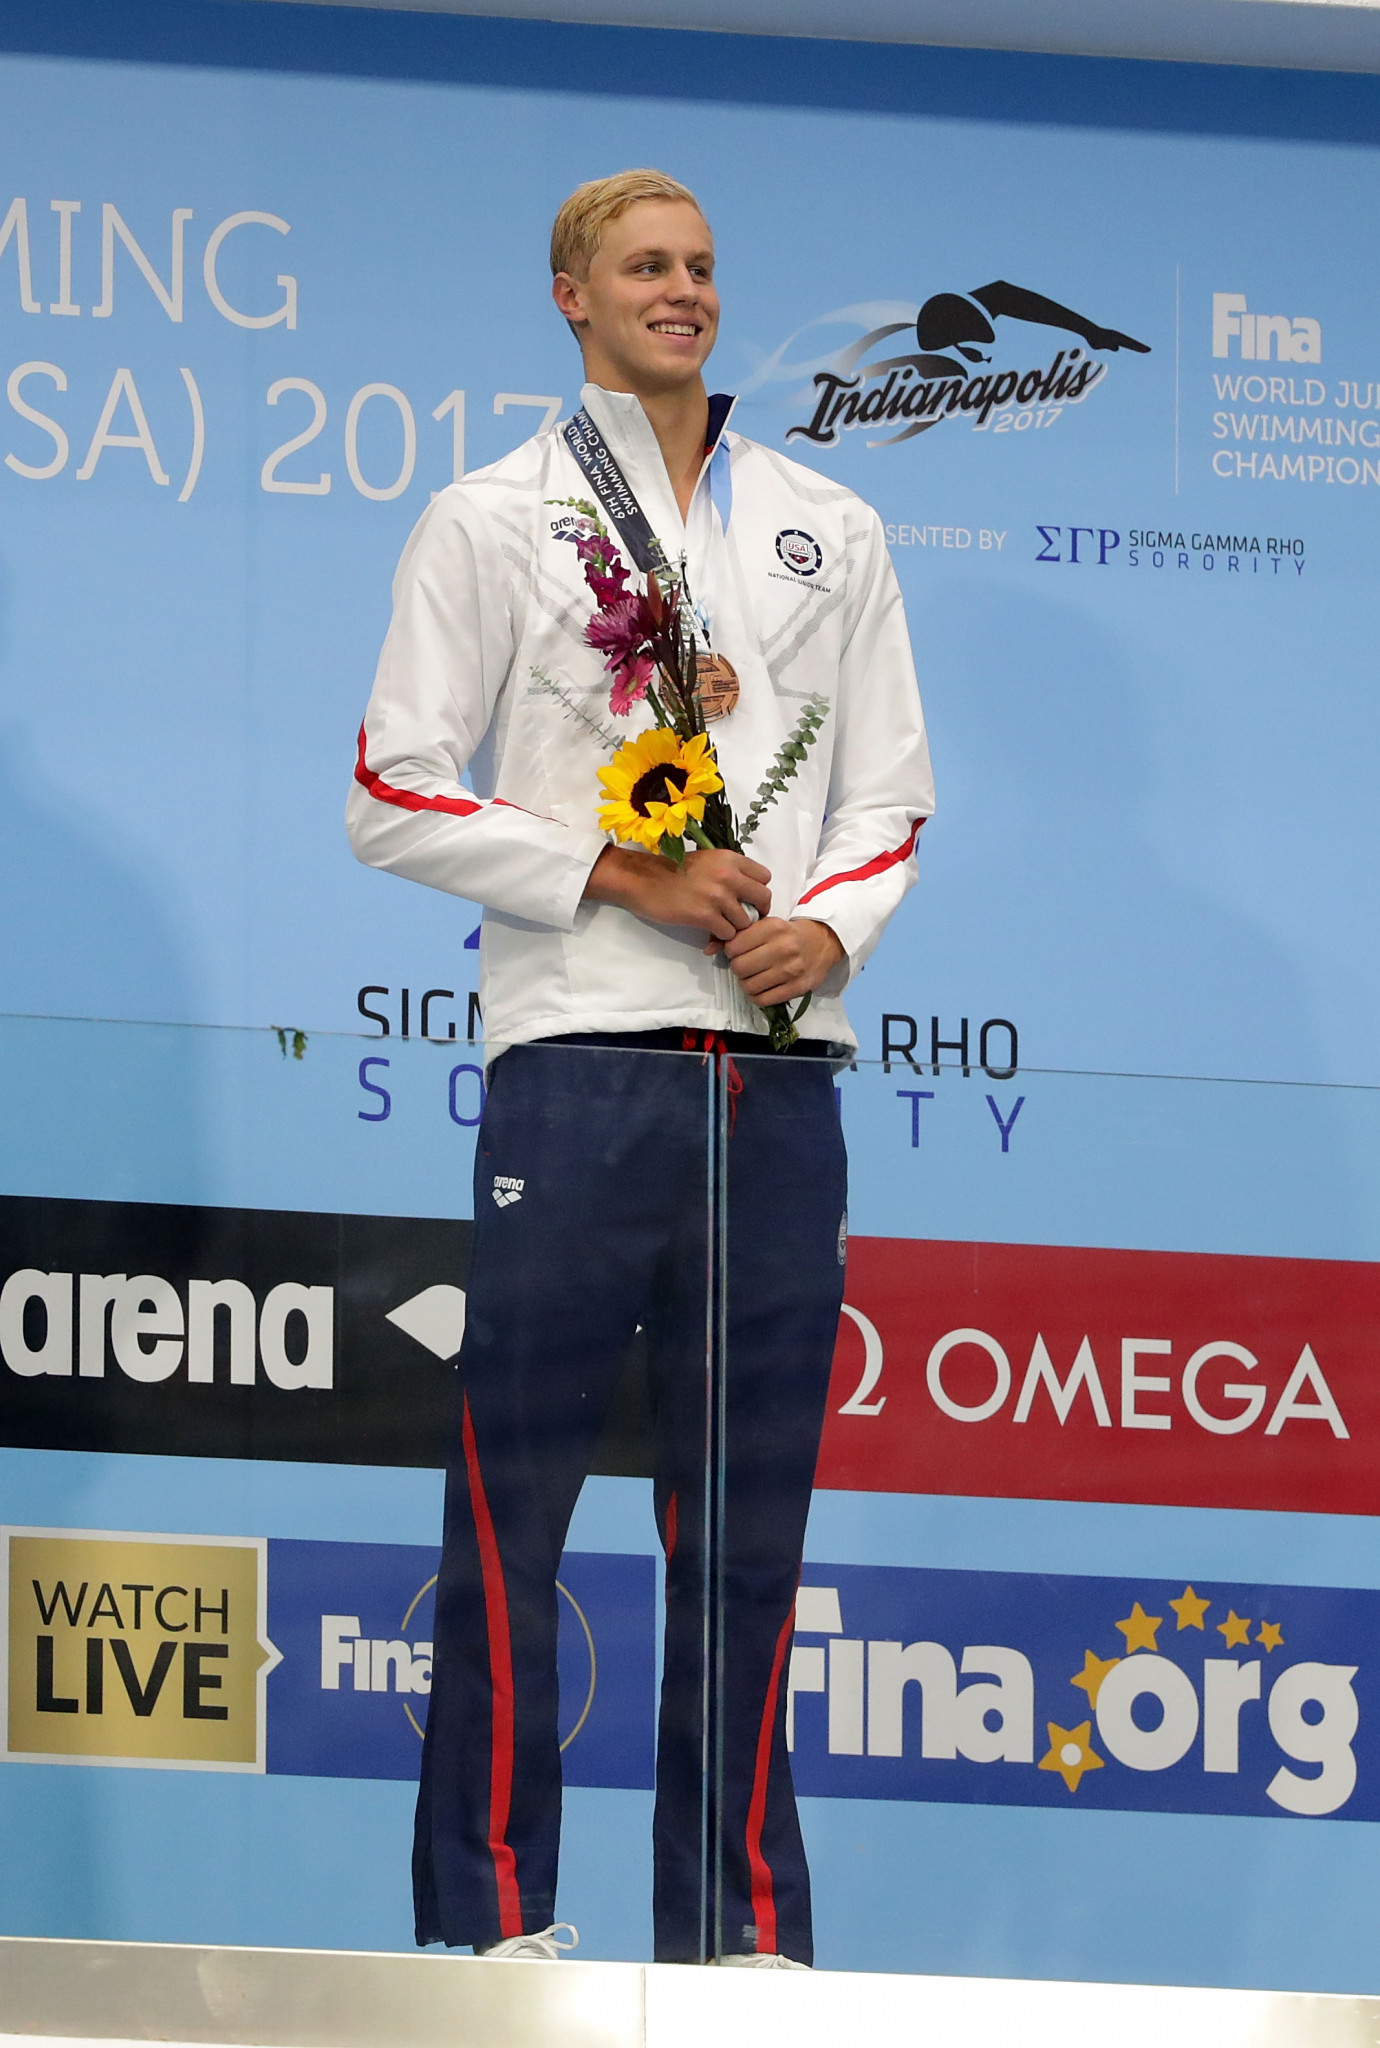 Matthew Willenbring celebrates his bronze medal-winning performance in the men's 100m freestyle event at the FINA World Junior Swimming Championships ©Getty Images